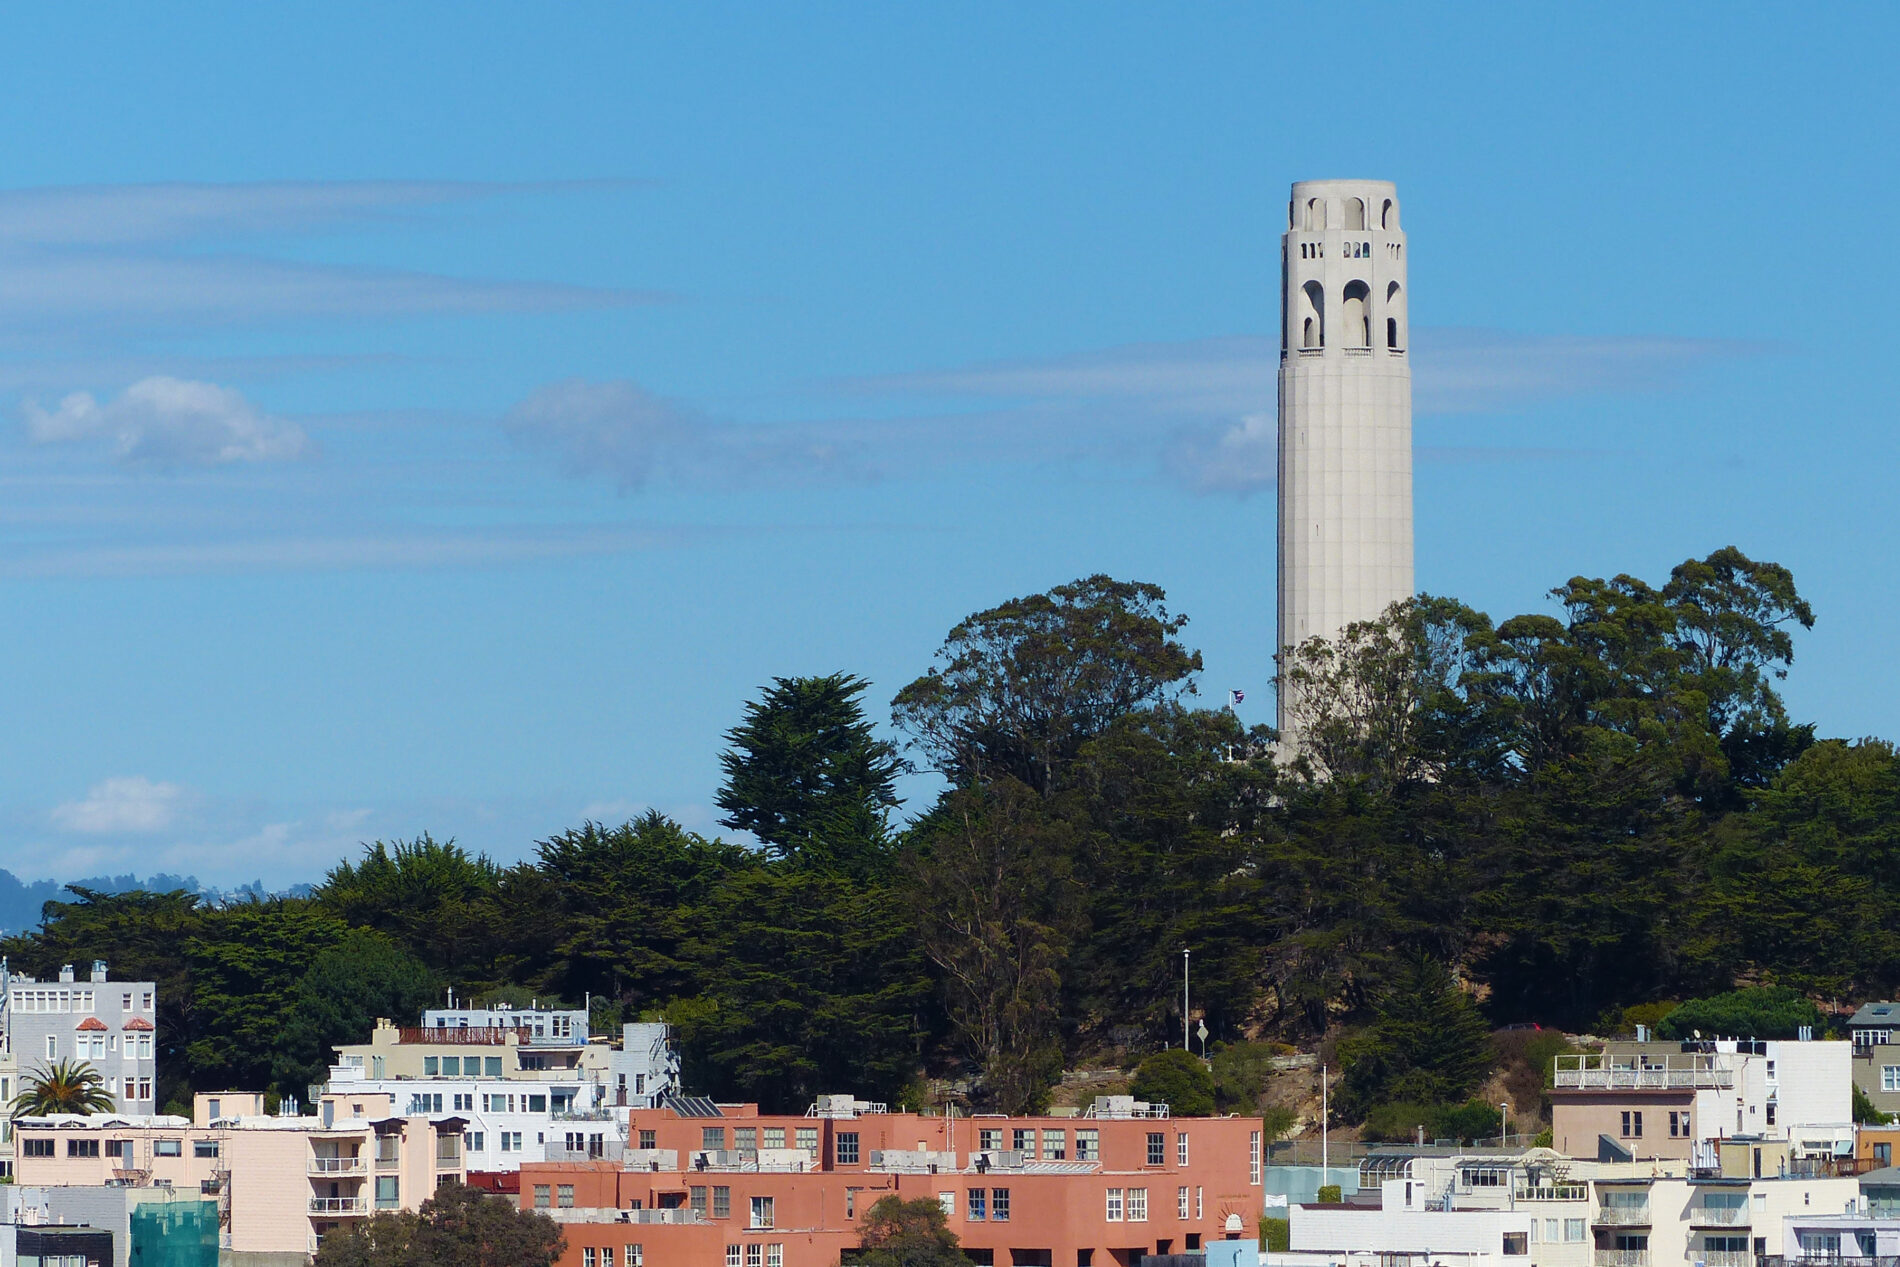 Coit Tower on Telegraph Hill in San Francisco.